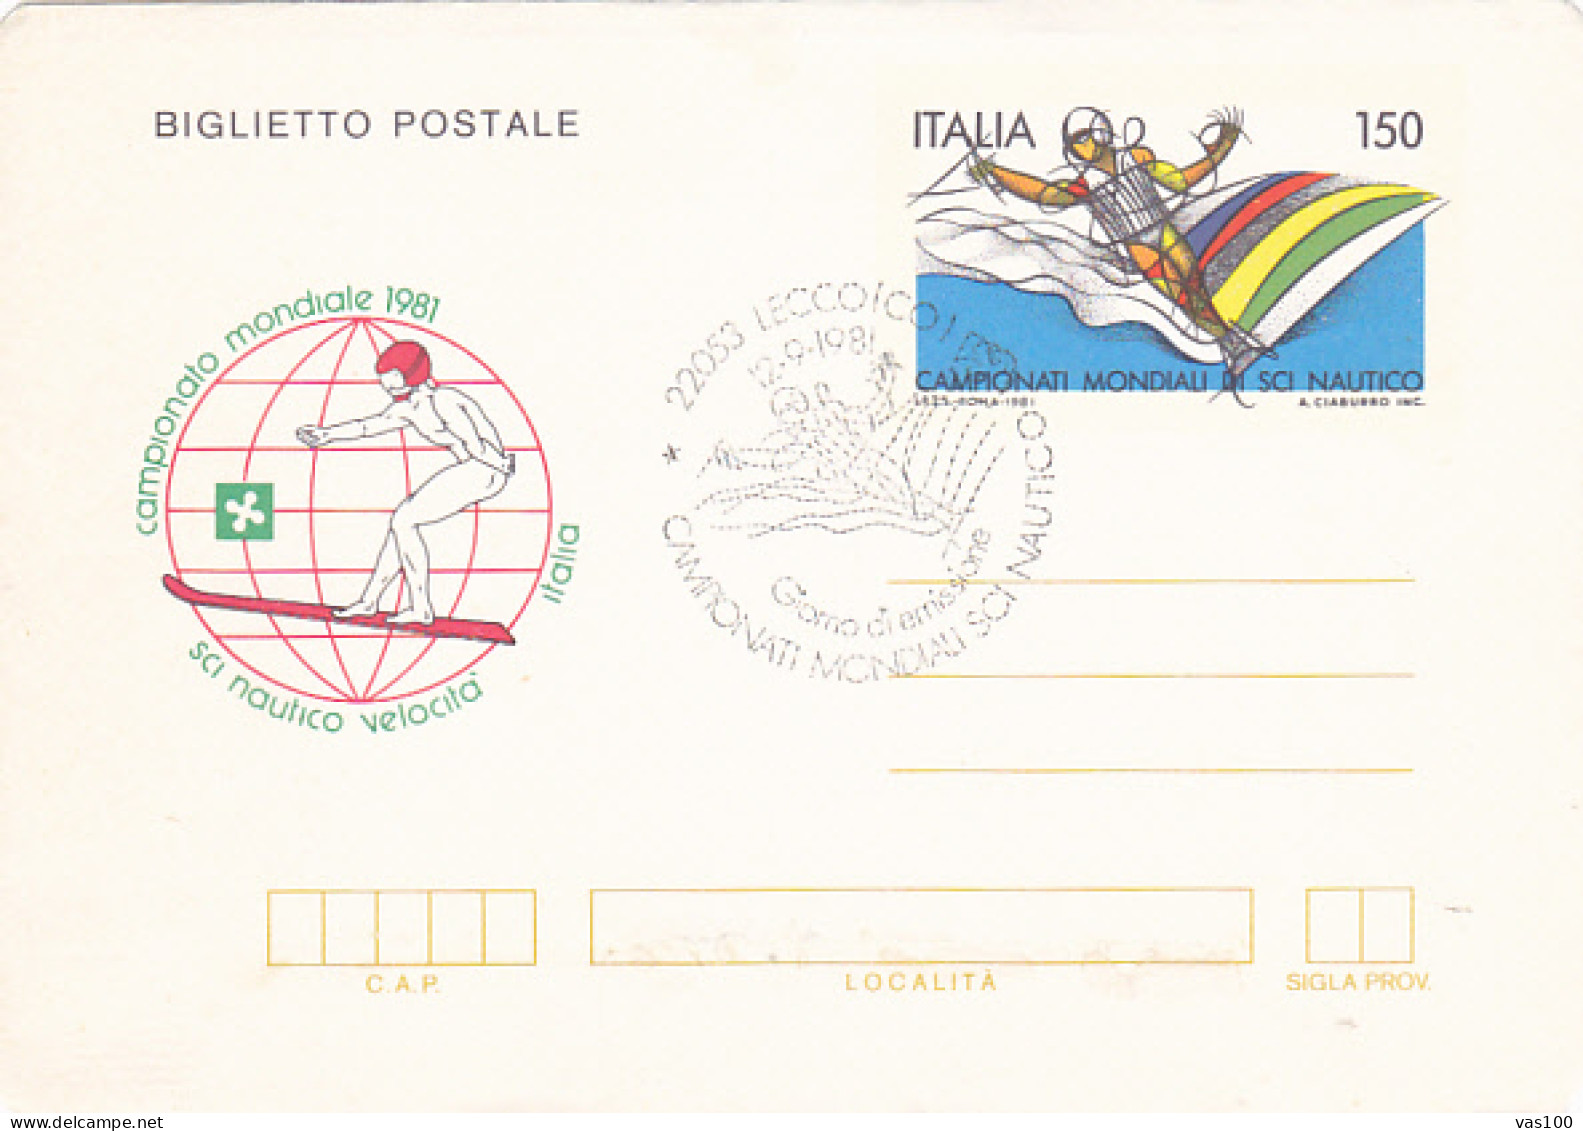 SPORTS, WATER SKIING, WORLD CHAMPIONSHIP, LETTERCARD STATIONERY, ENTIER POSTAL, OBKIT FDC, 1981, ITALY - Water-skiing